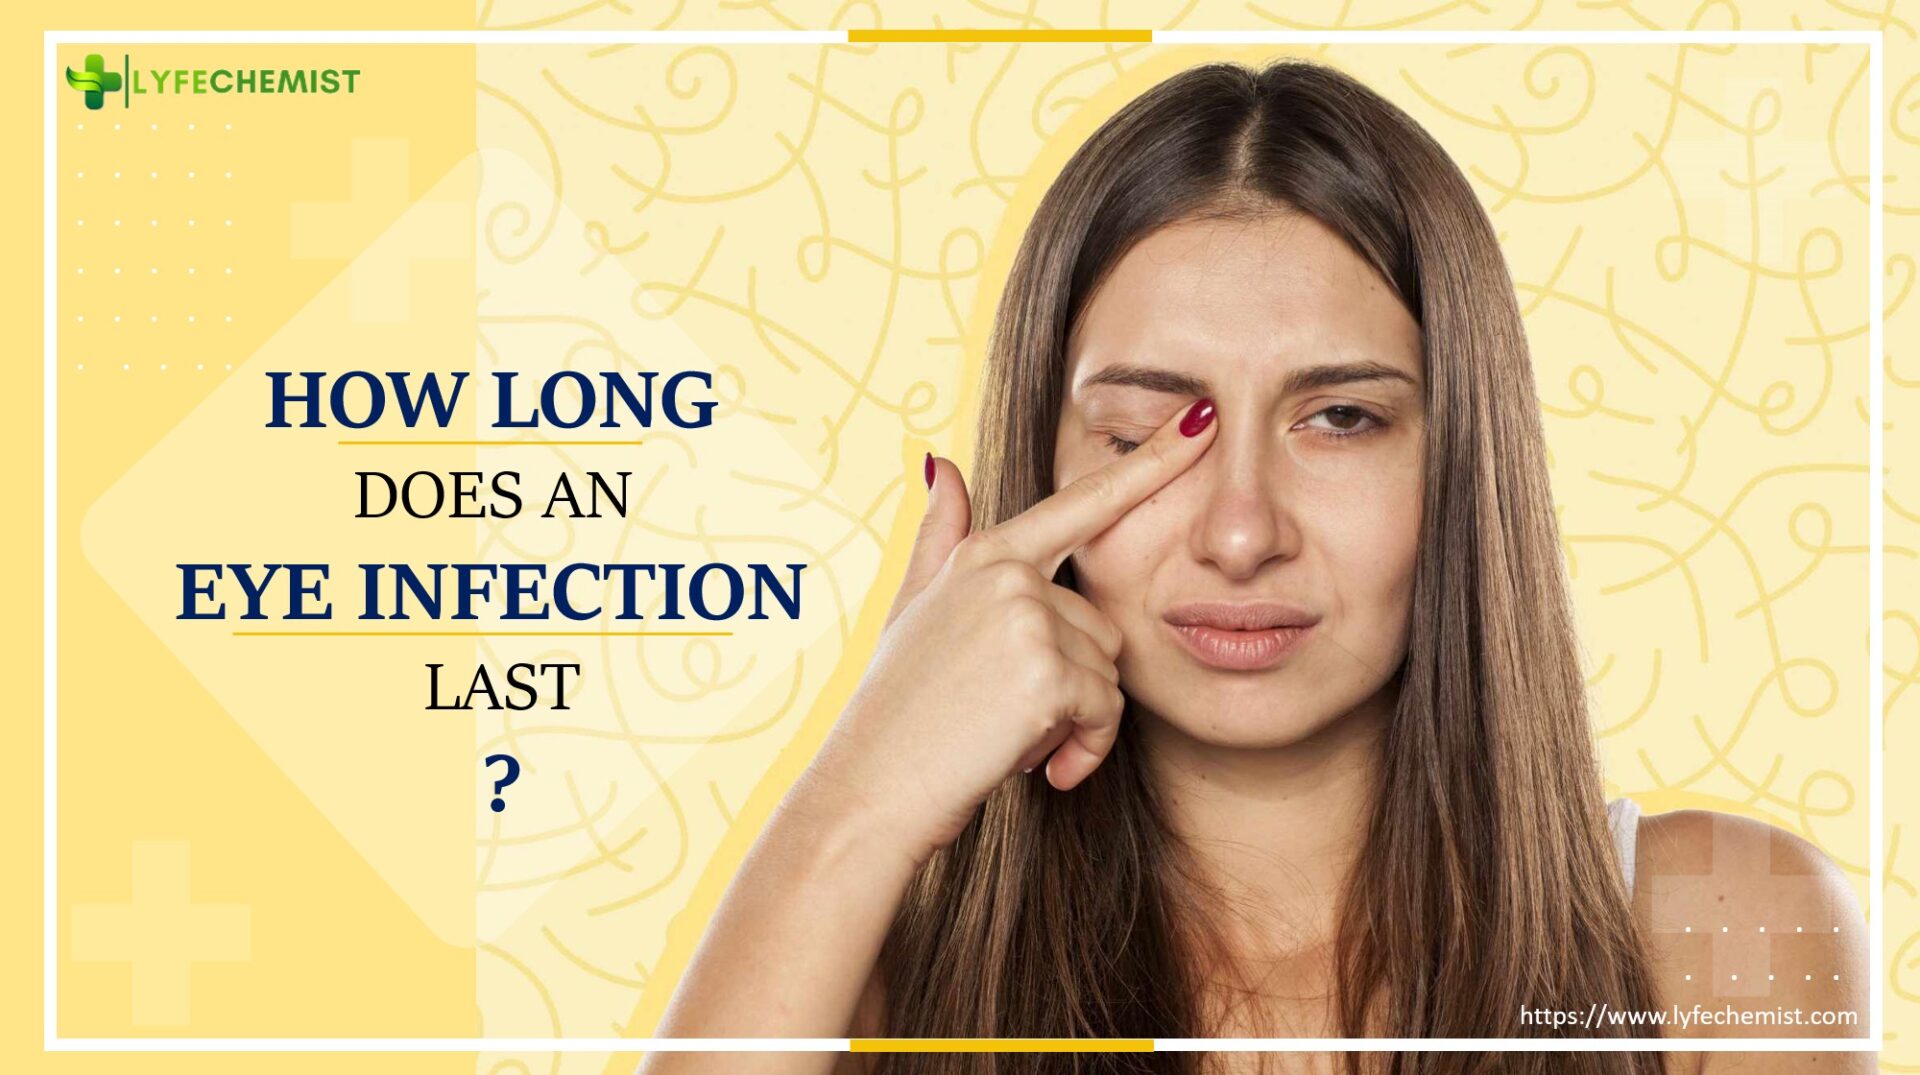 How long does an eye infection last